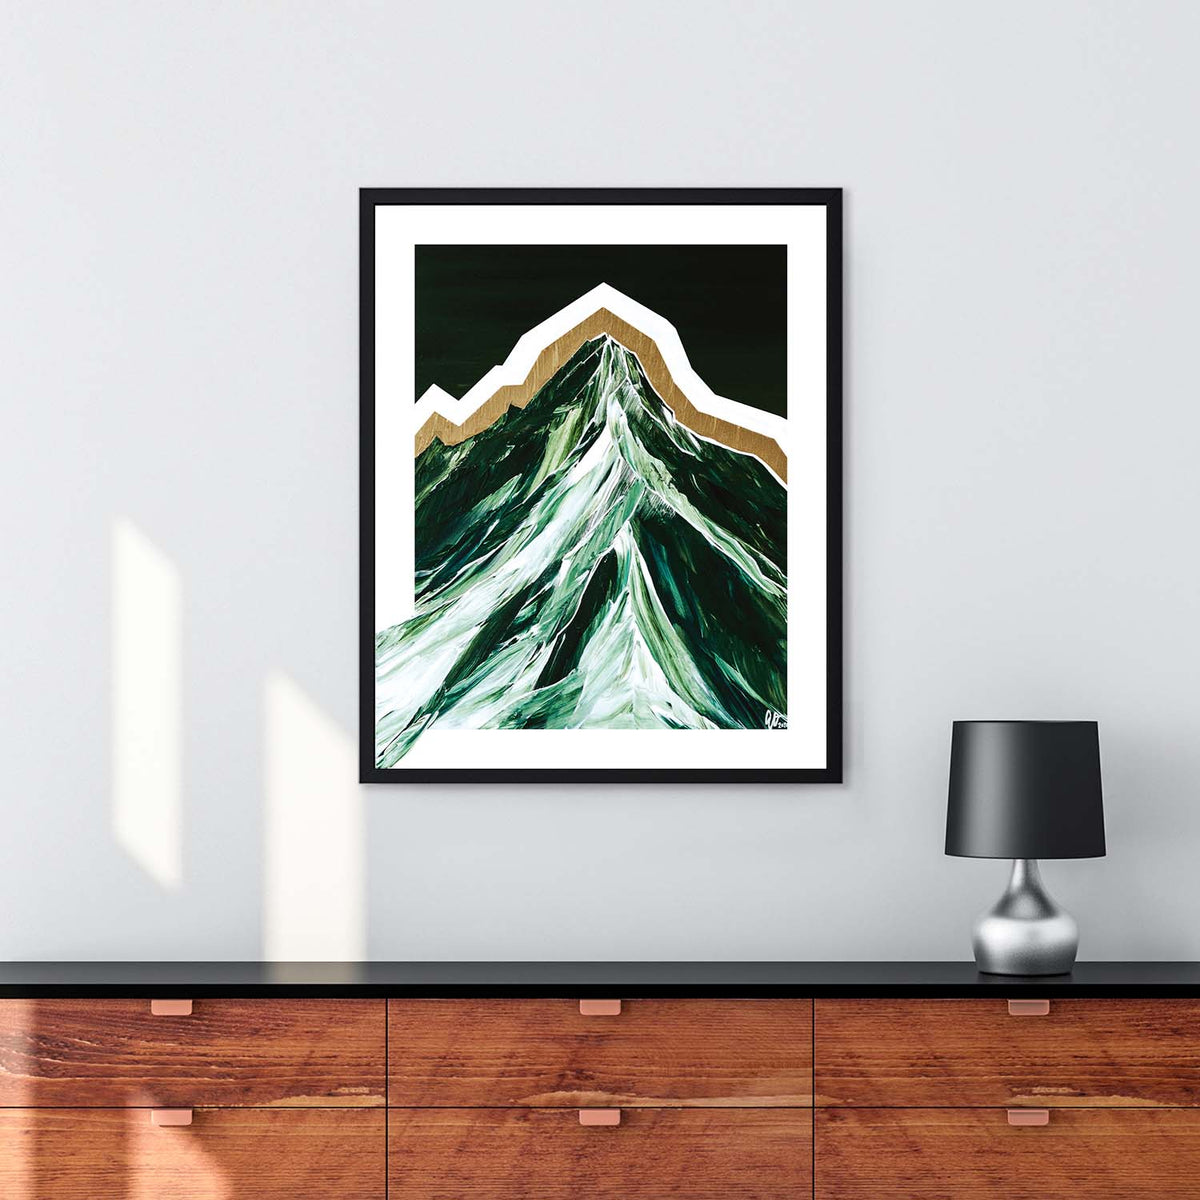 Find (Mt. Baker) - Canvas Print by Erin Oostra | Art Bloom Canvas Art